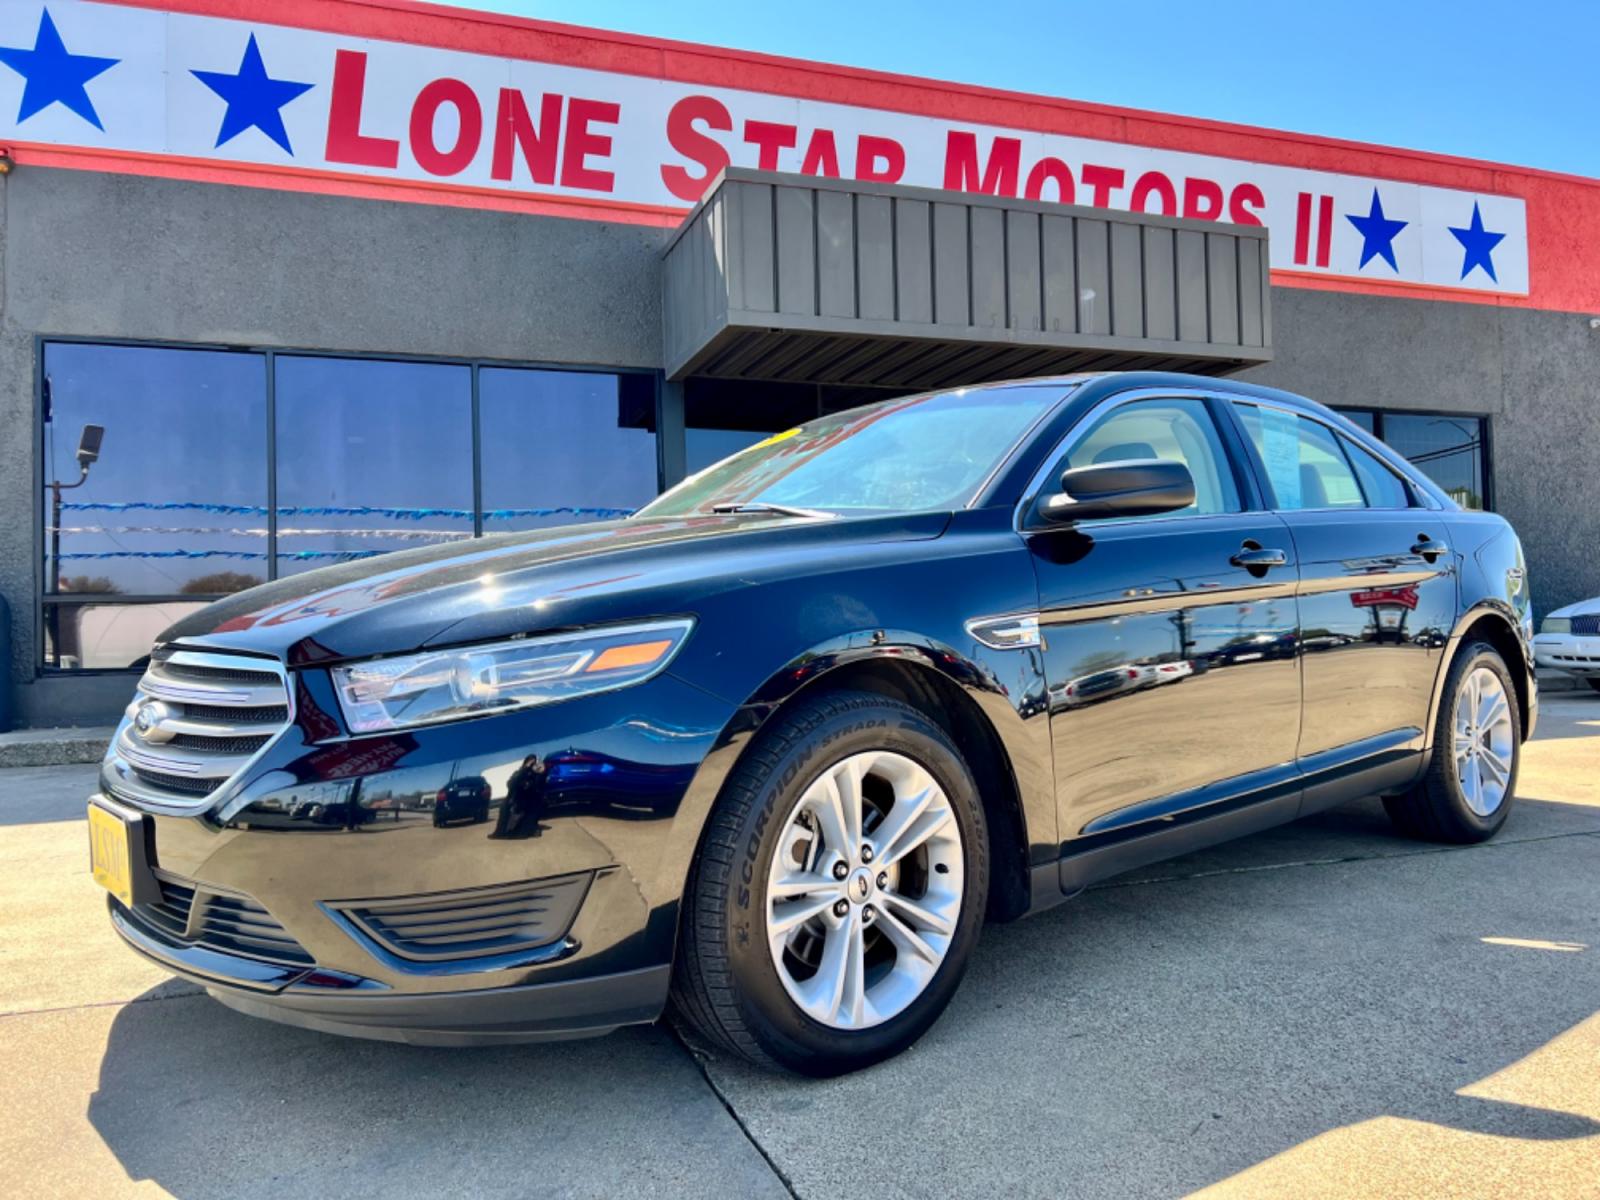 2017 BLACK FORD TAURUS (1FAHP2D81HG) , located at 5900 E. Lancaster Ave., Fort Worth, TX, 76112, (817) 457-5456, 0.000000, 0.000000 - This is a 2017 FORD TAURUS 4 DOOR SEDAN that is in excellent condition. There are no dents or scratches. The interior is clean with no rips or tears or stains. All power windows, door locks and seats. Ice cold AC for those hot Texas summer days. It is equipped with a CD player, AM/FM radio, AUX port - Photo #1